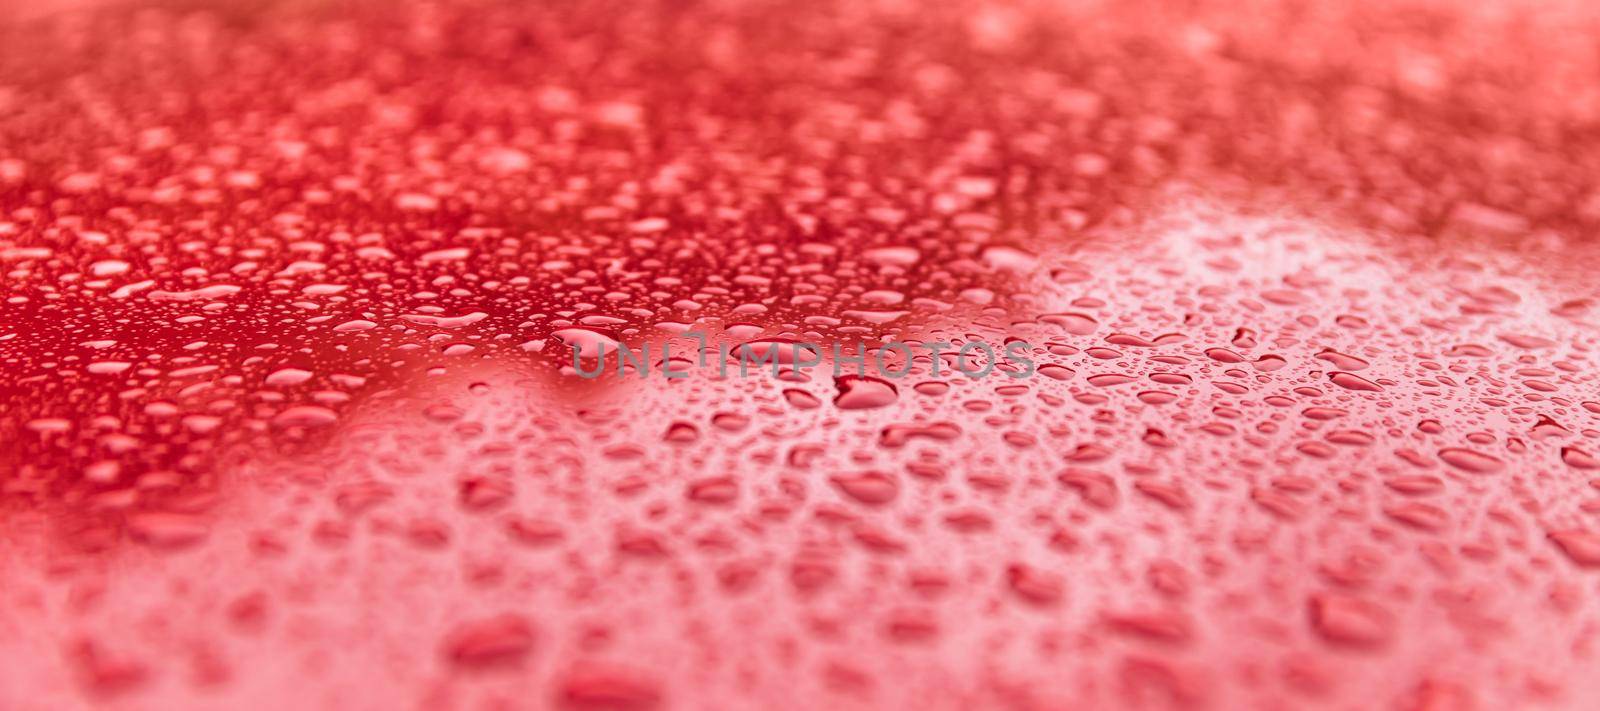 Rain drops on a red surface. Water drops on red metal texture. Shallow focus. Detail of red wet surface after rain